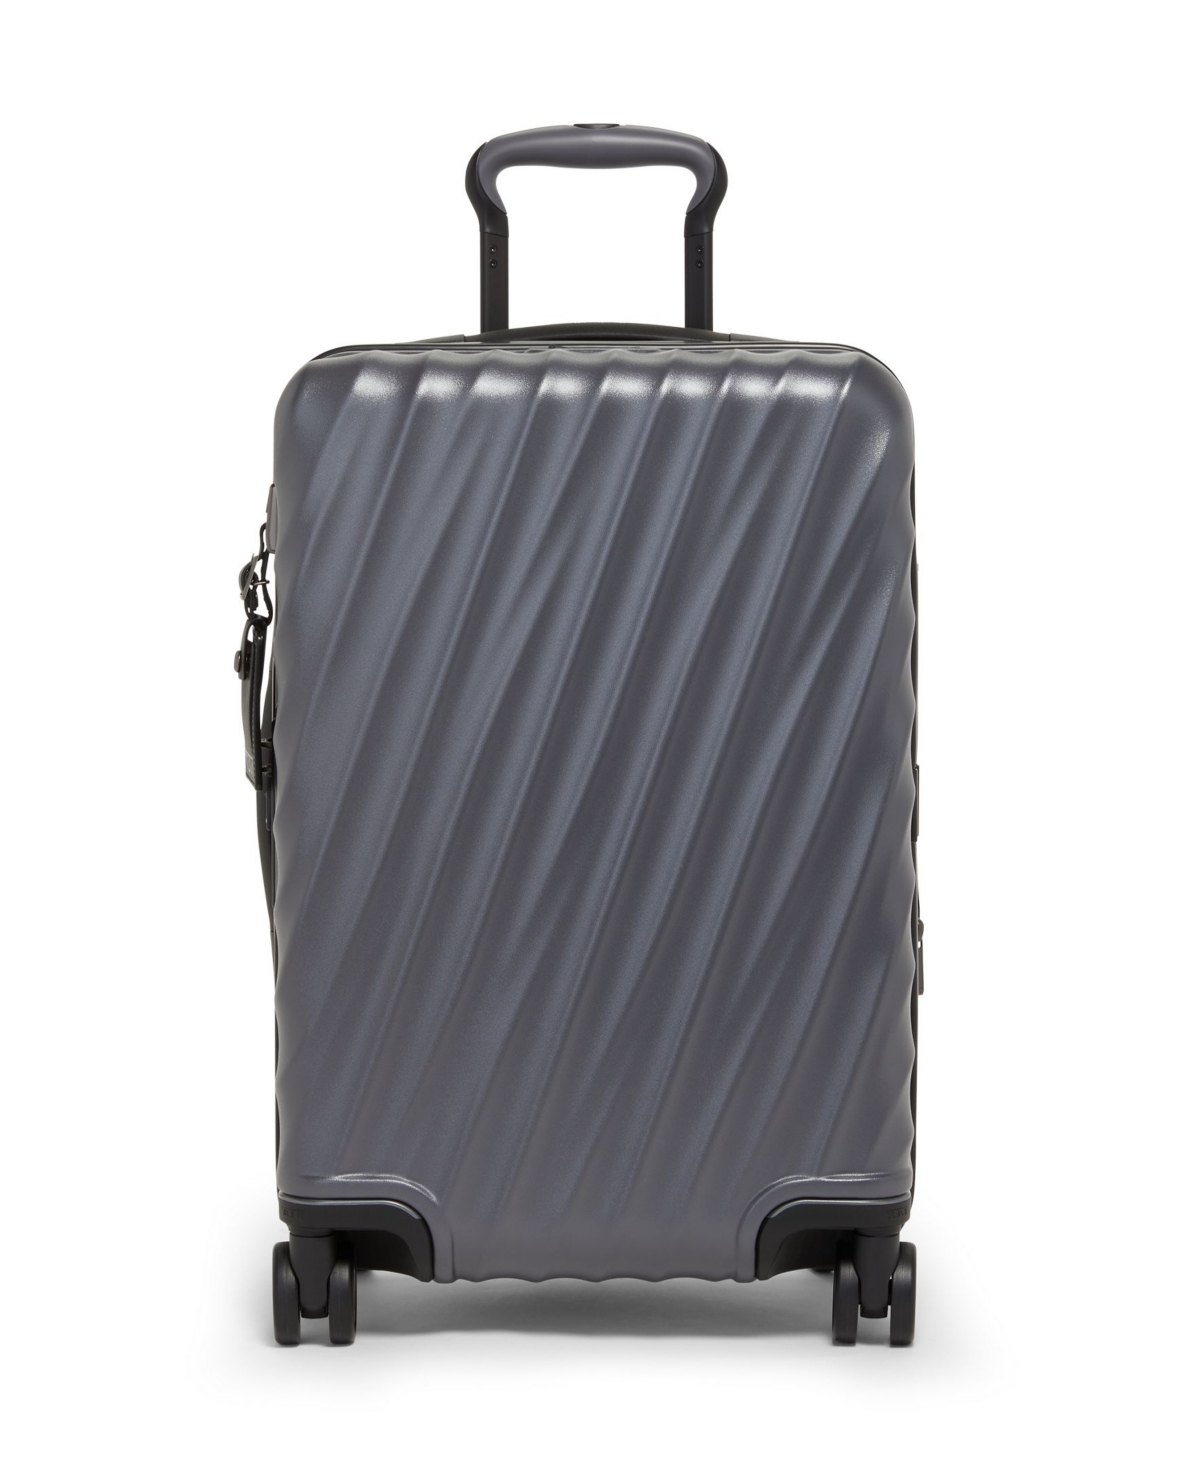 19 Degree International Expandable 4 Wheeled Carry-On - Gray Texture